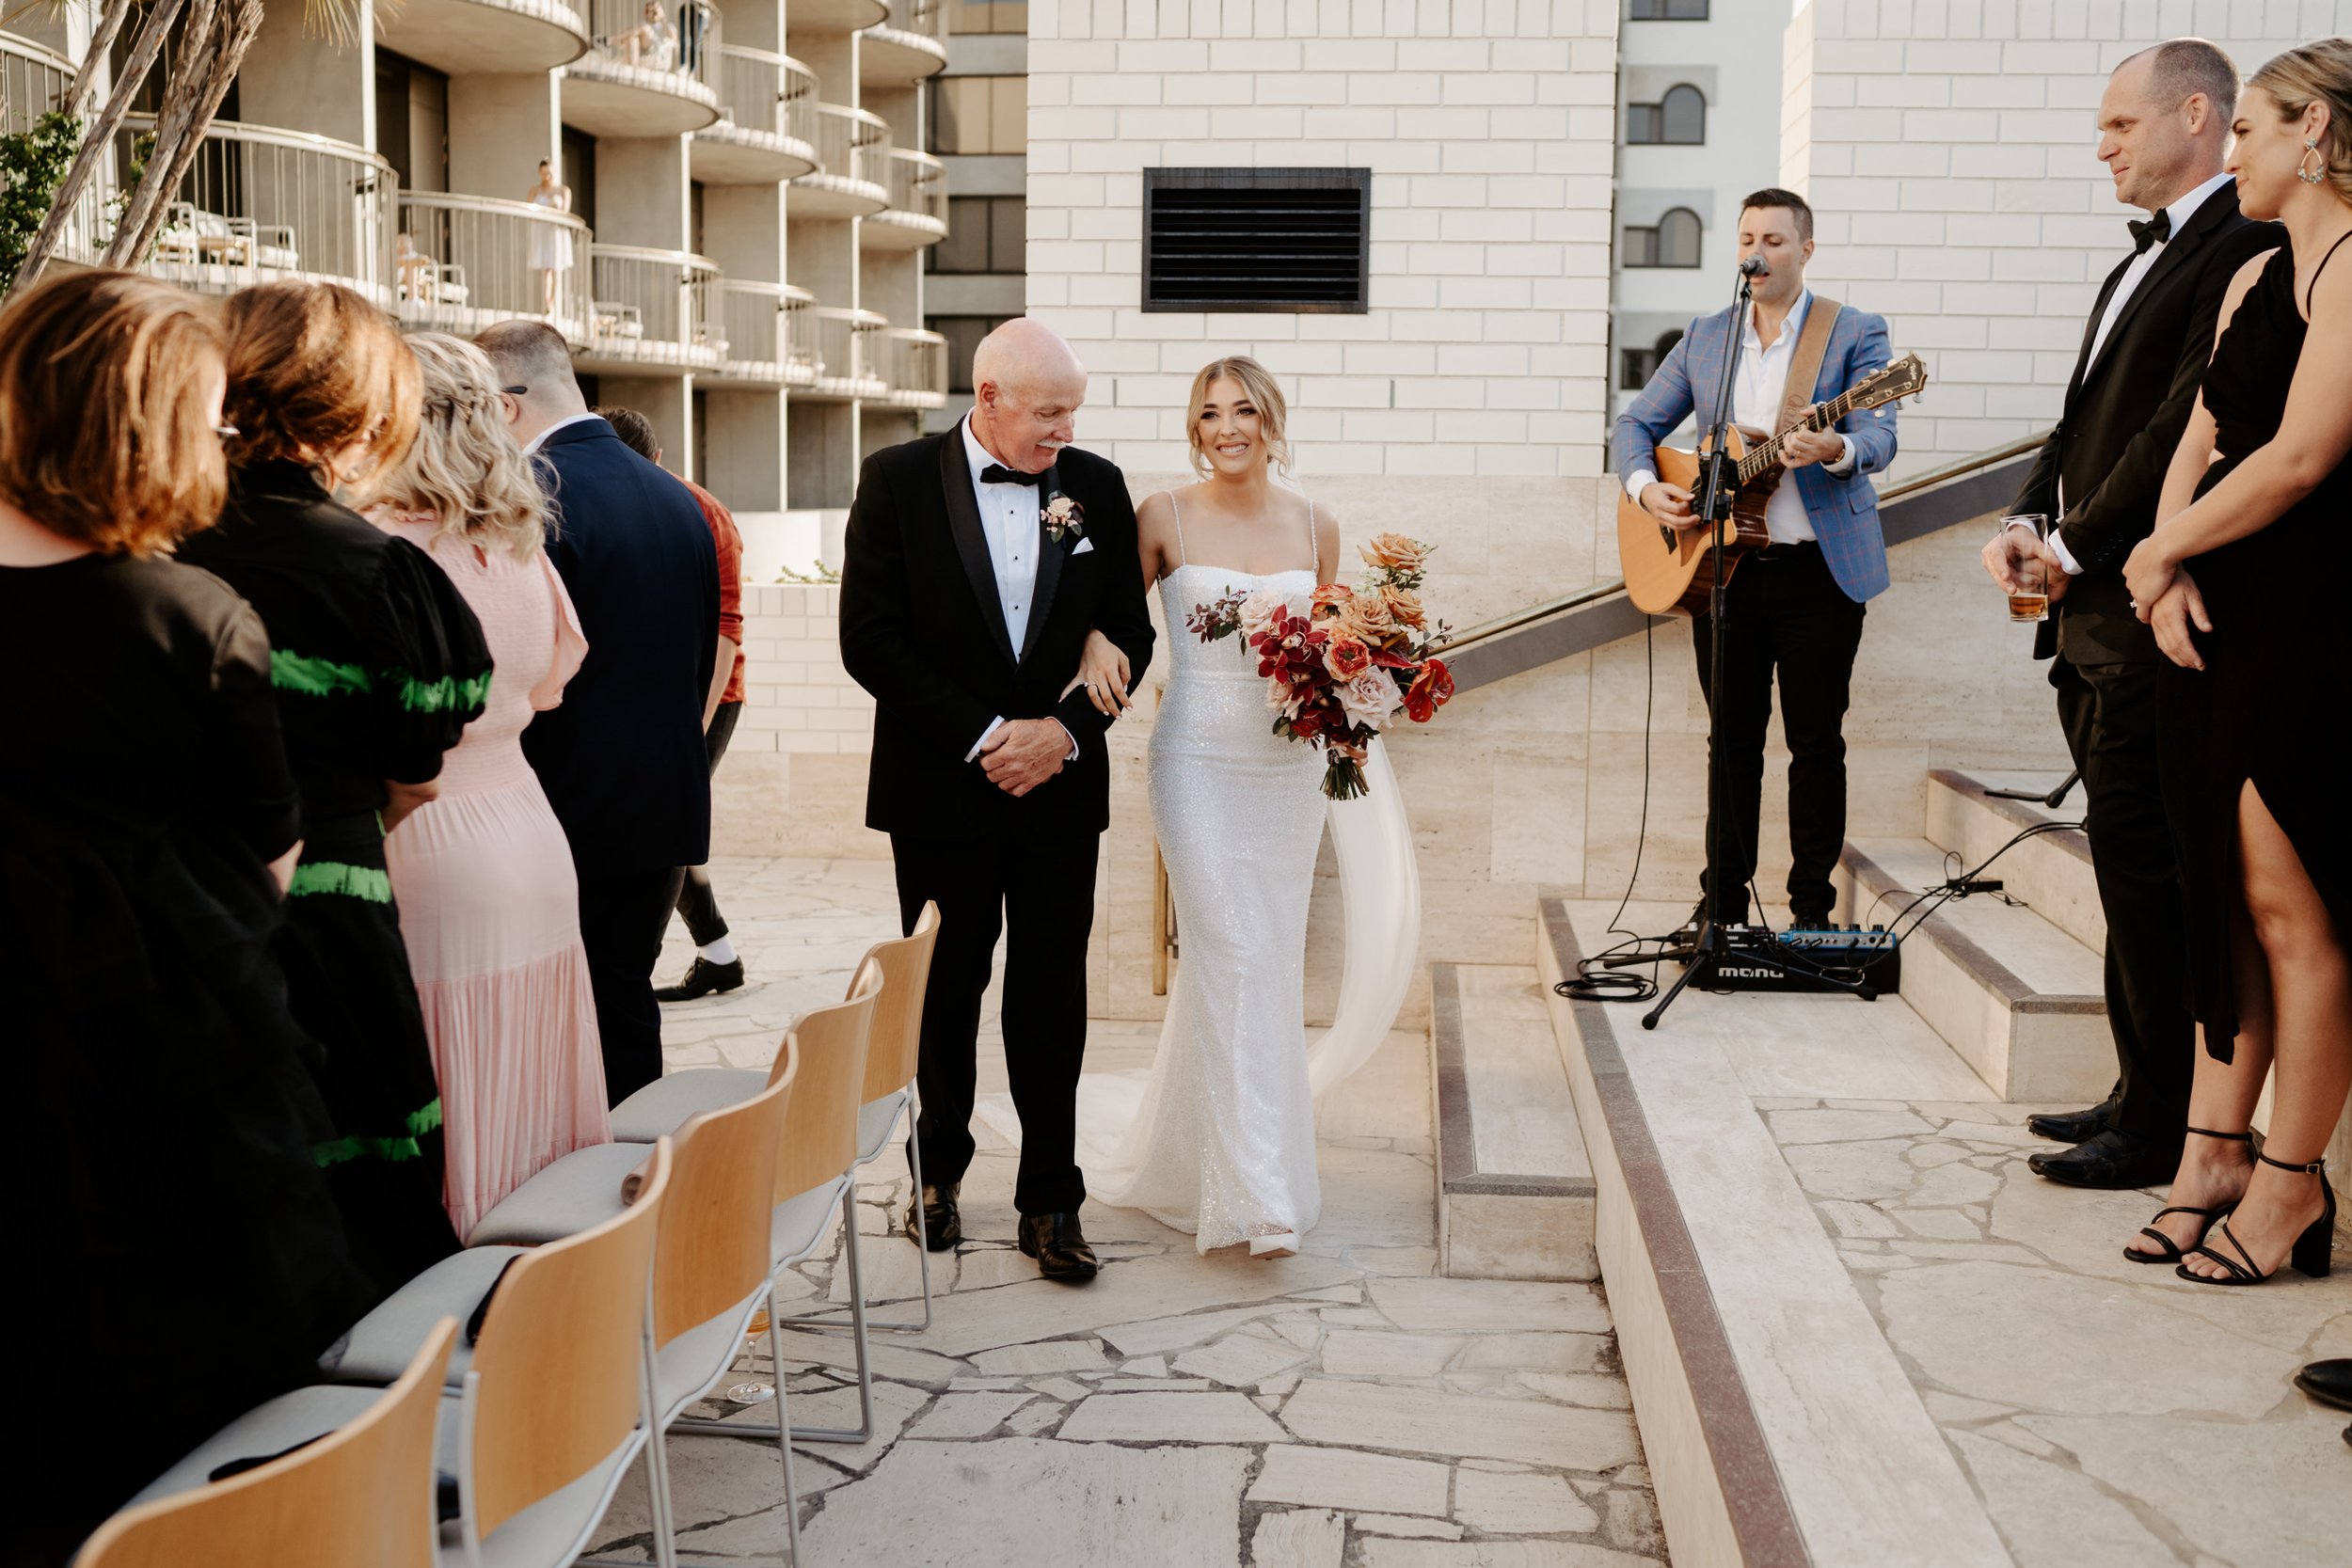 ceremony in the amphitheatre - The Calile Hotel Wedding - Trent and Jessie Brisbane Photography and Videography